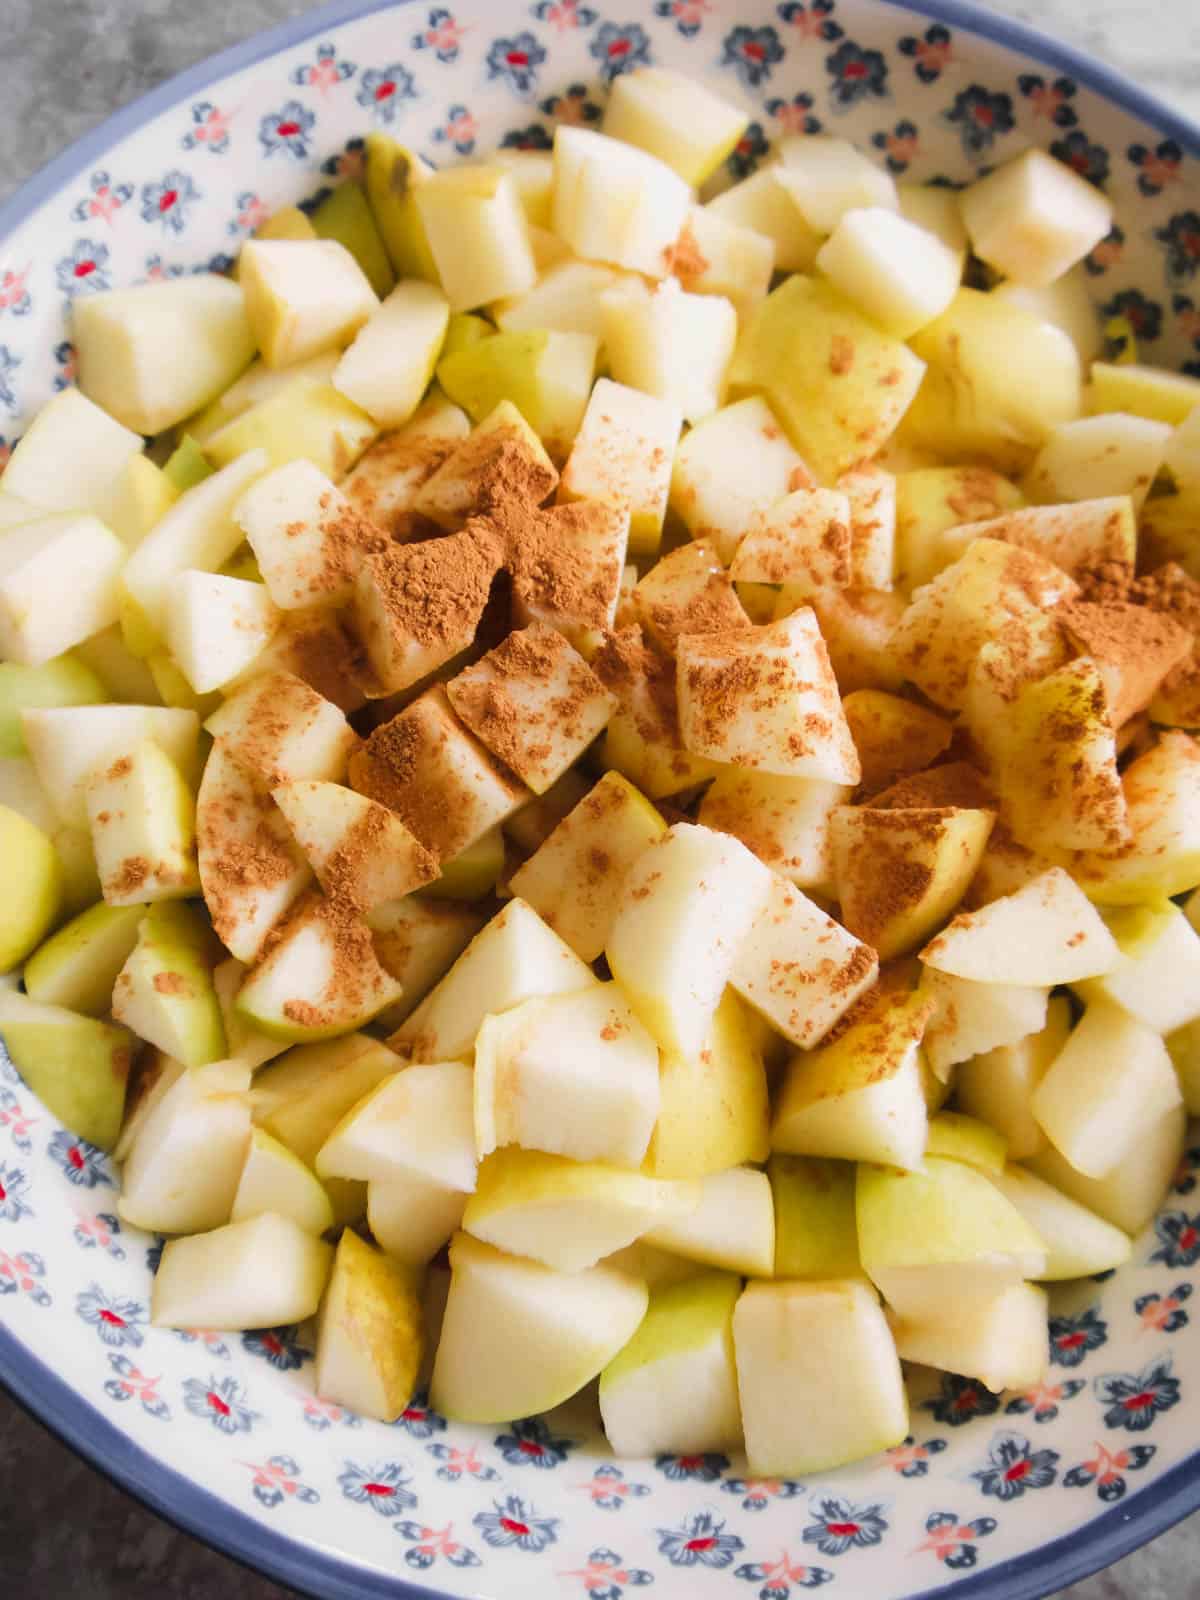 Apples and seasoning in a baking dish prior to baking.